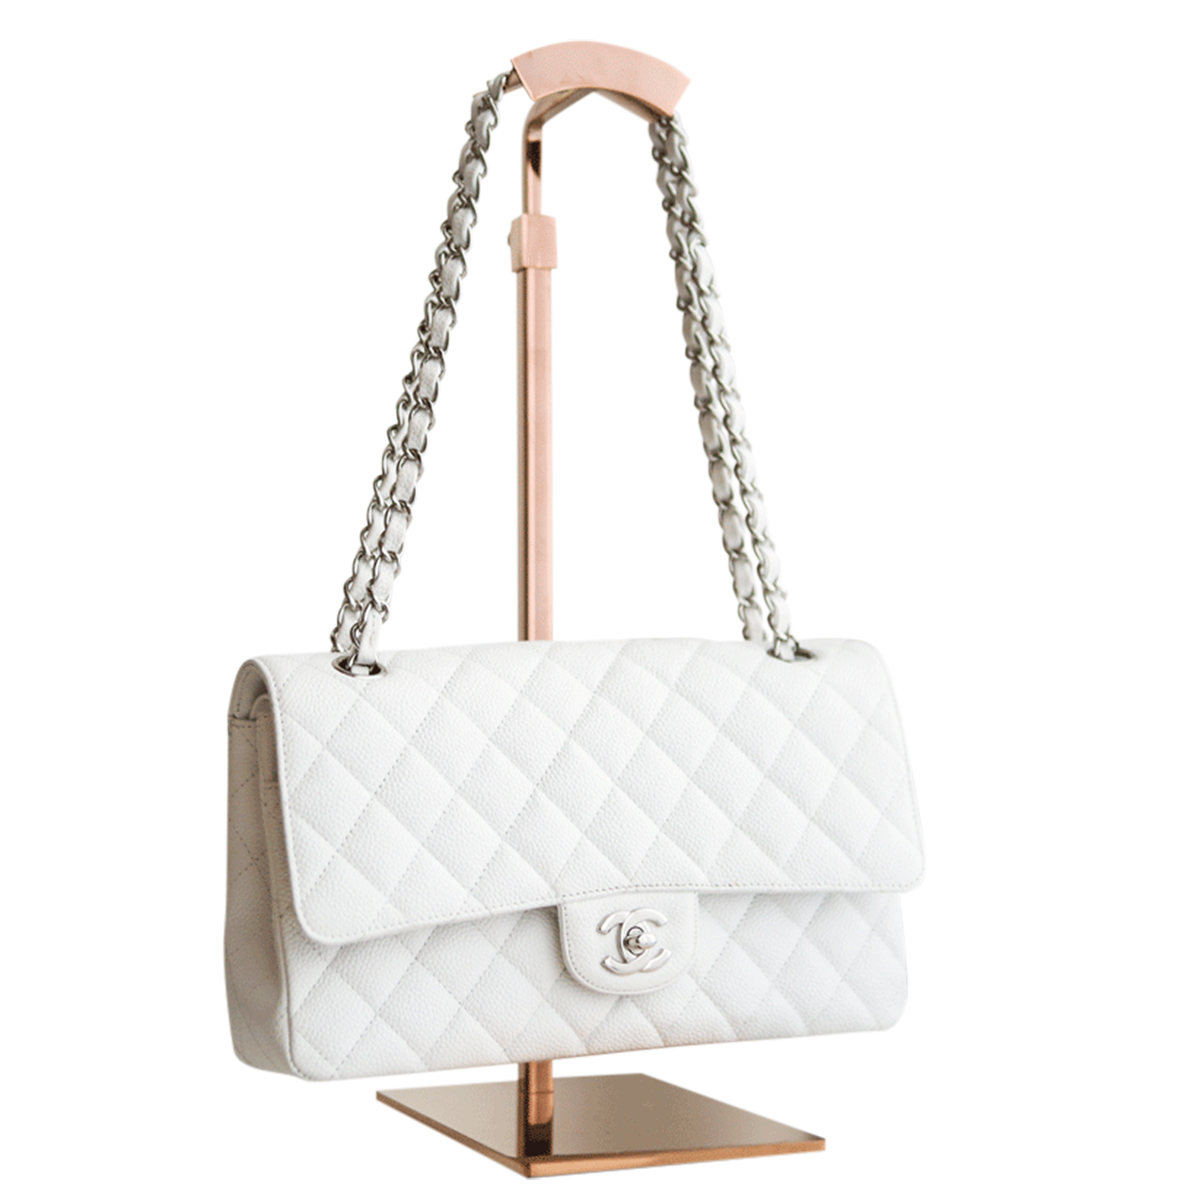 Hire a Chanel Classic Flap Bag - timeless and iconic handbag or other  designer handbags.